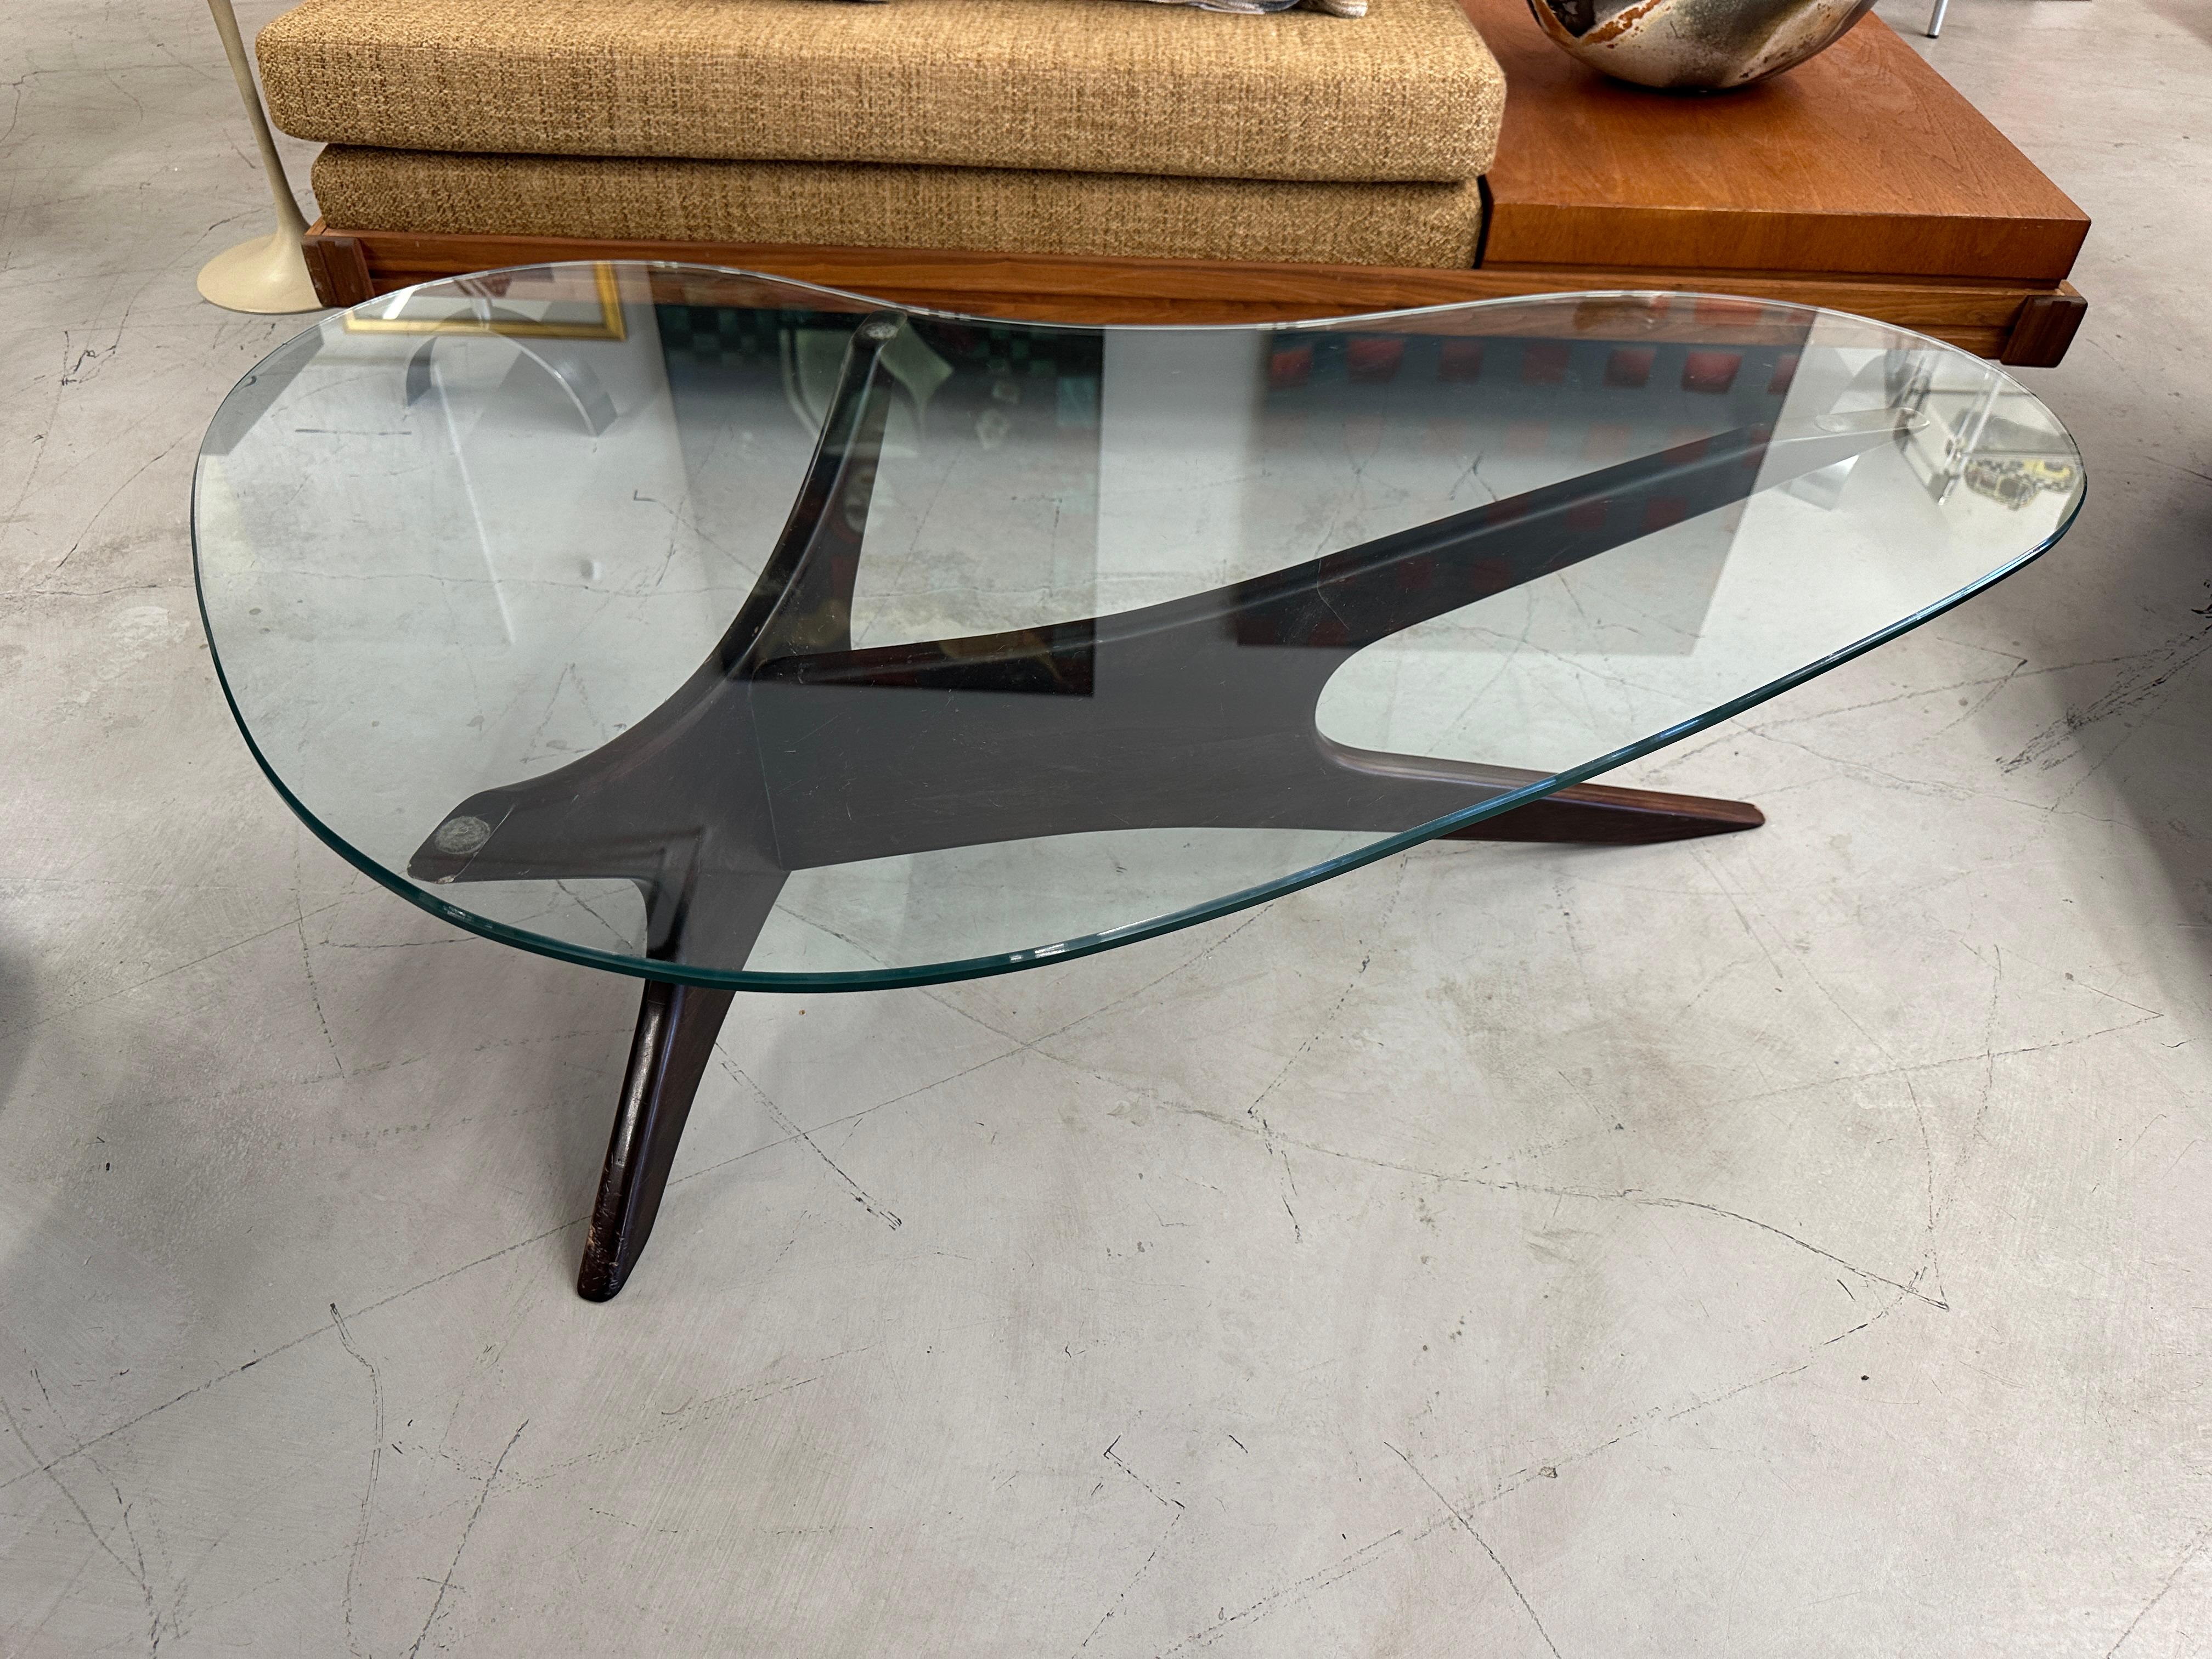 A nice iconic coffee table by Adrian Pearsall for Craft Associates. The top has a biomorphic kidney shaped piece of glass. The glass is in good condition with a few minor surface scratches. No edge chips. 
The base has some wear and nicks, scuffs